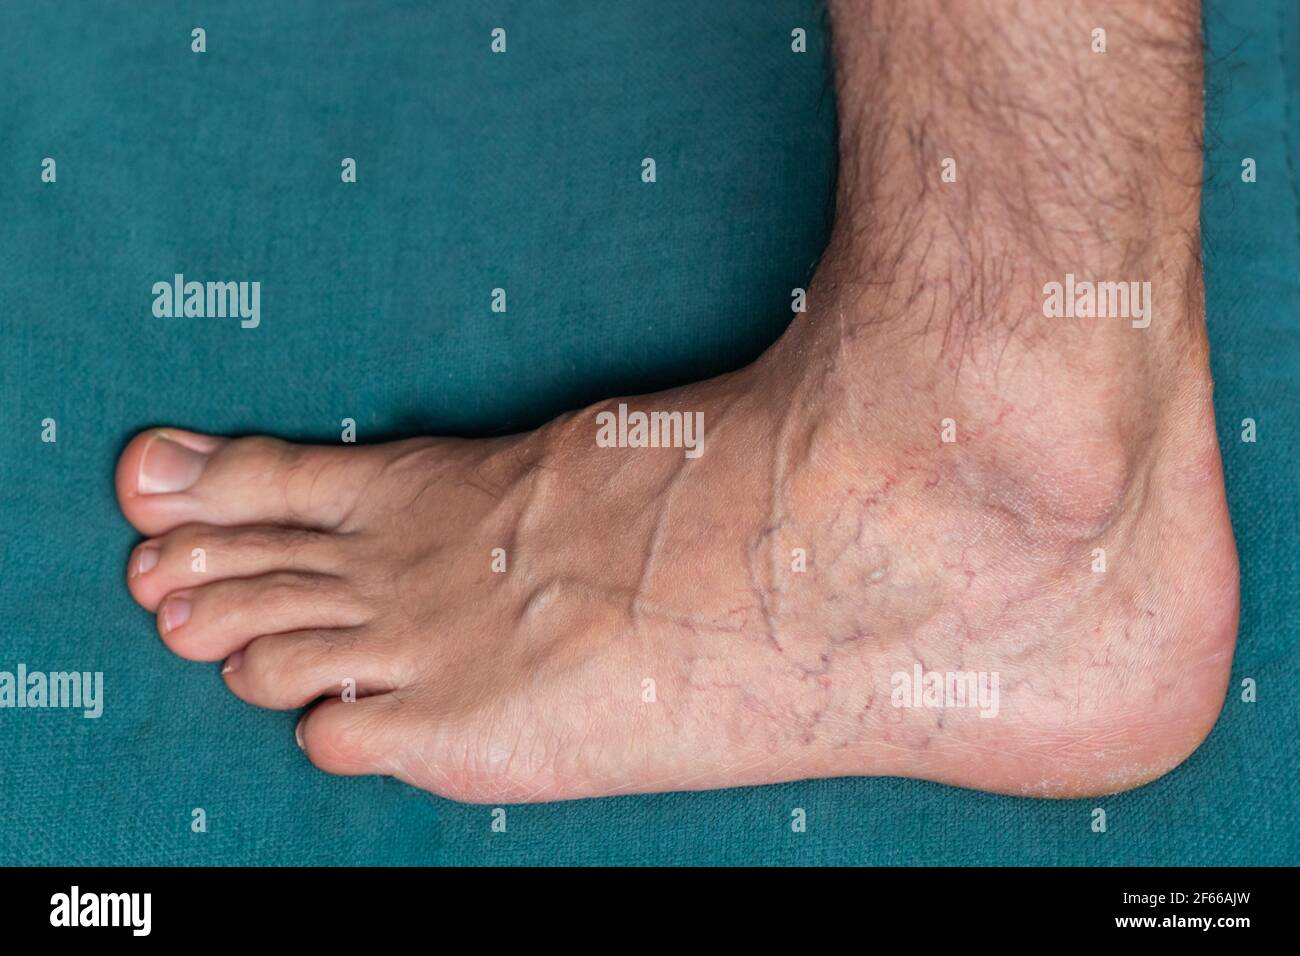 Adult man's foot with varicose veins Stock Photo